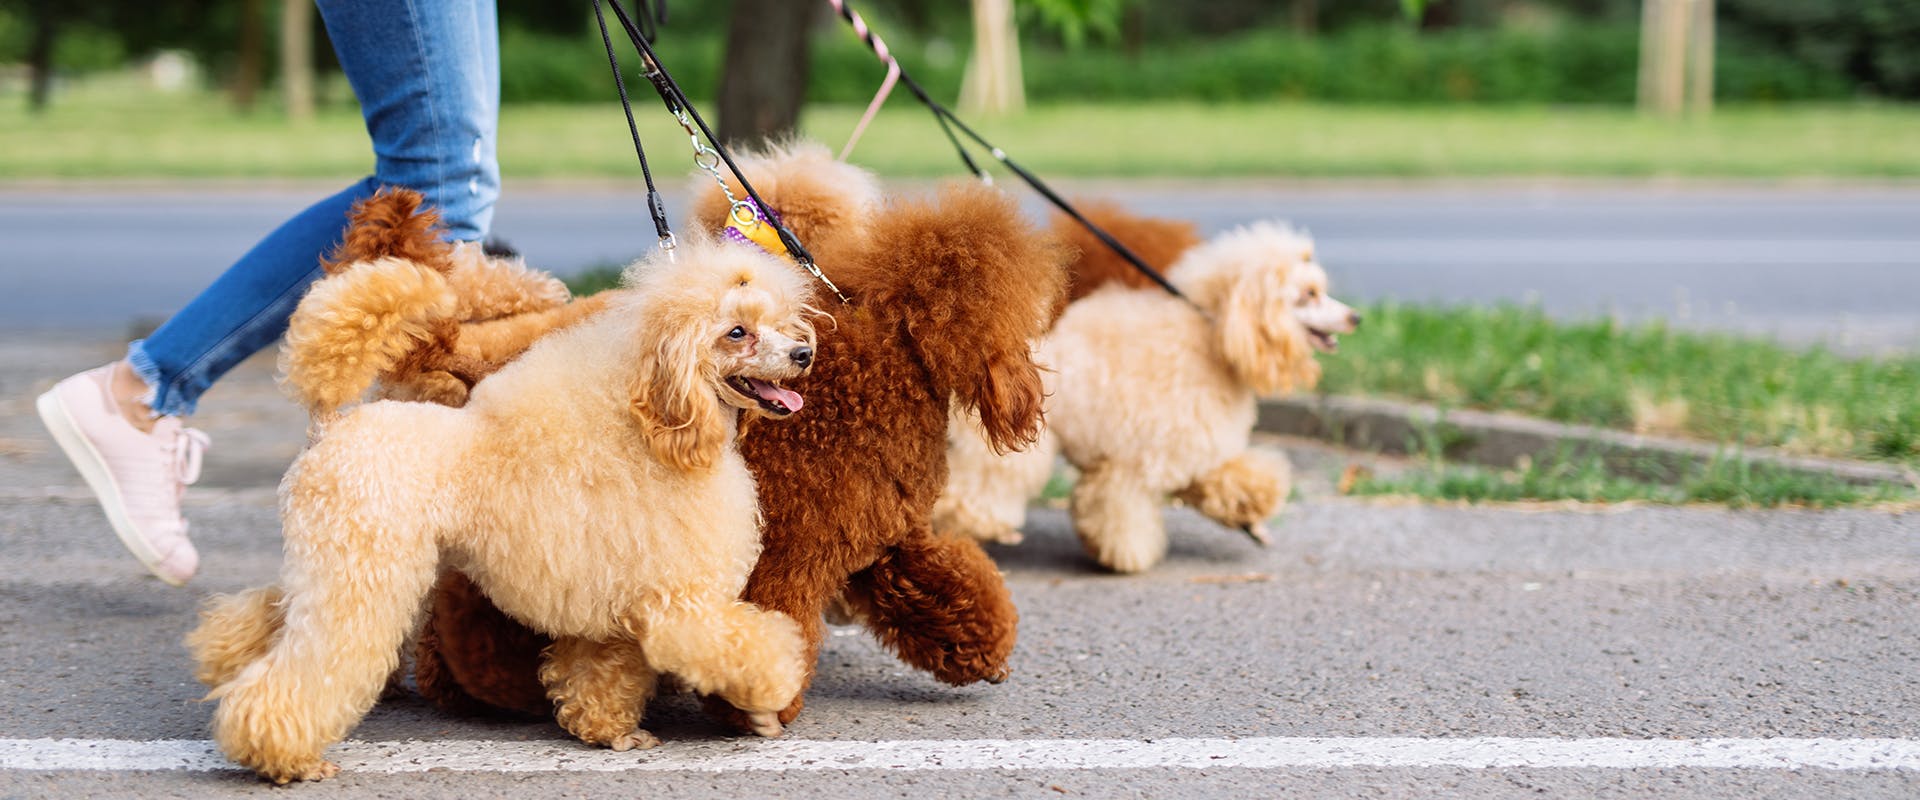 A person walking a group of Poodles